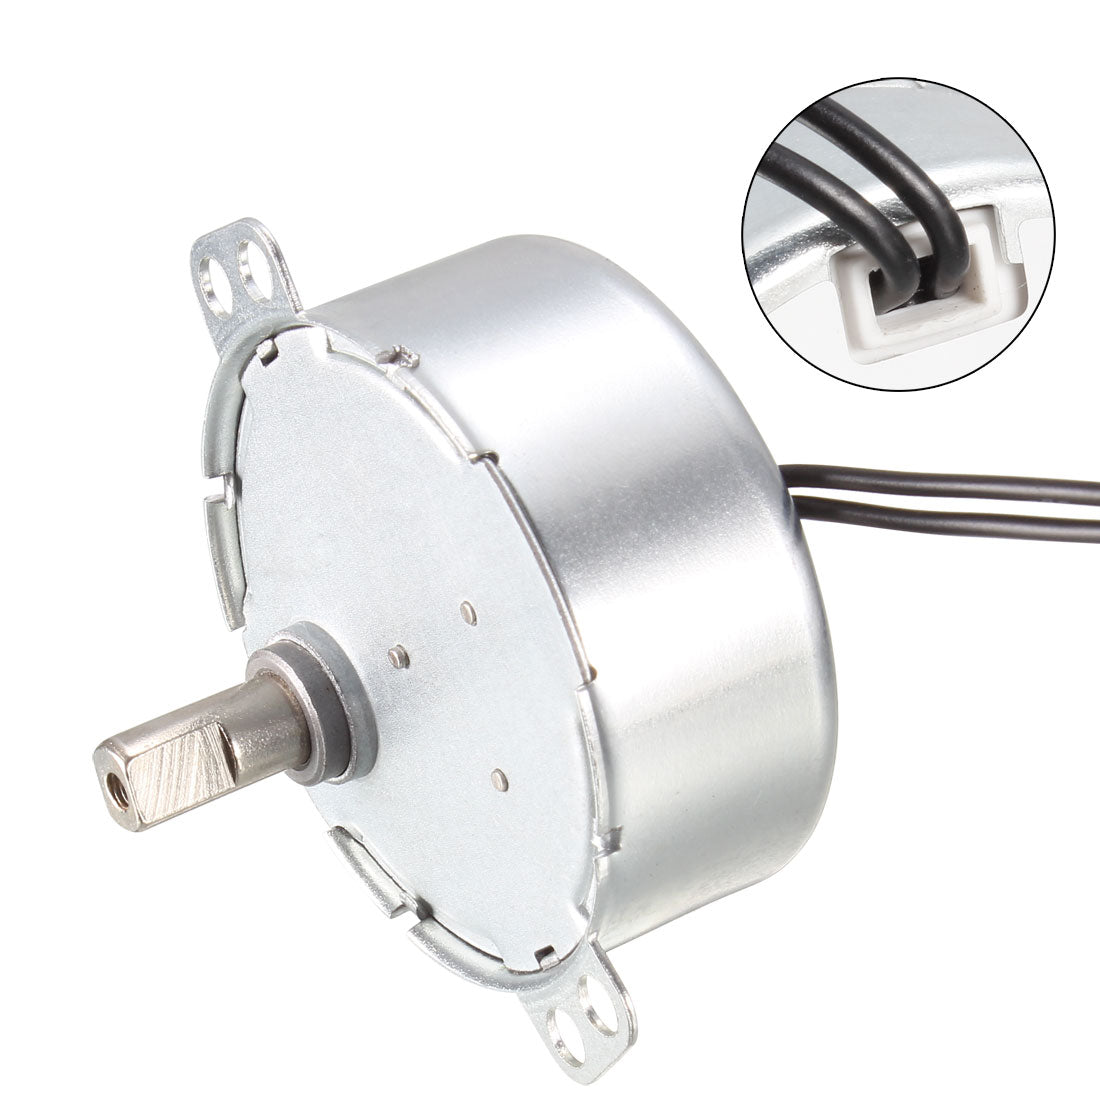 uxcell Uxcell Synchronous Motor AC 220-240V 4W 45-54RPM/MIN 50-60Hz CCW/CW for Hand-Made, Model or Guide Motor